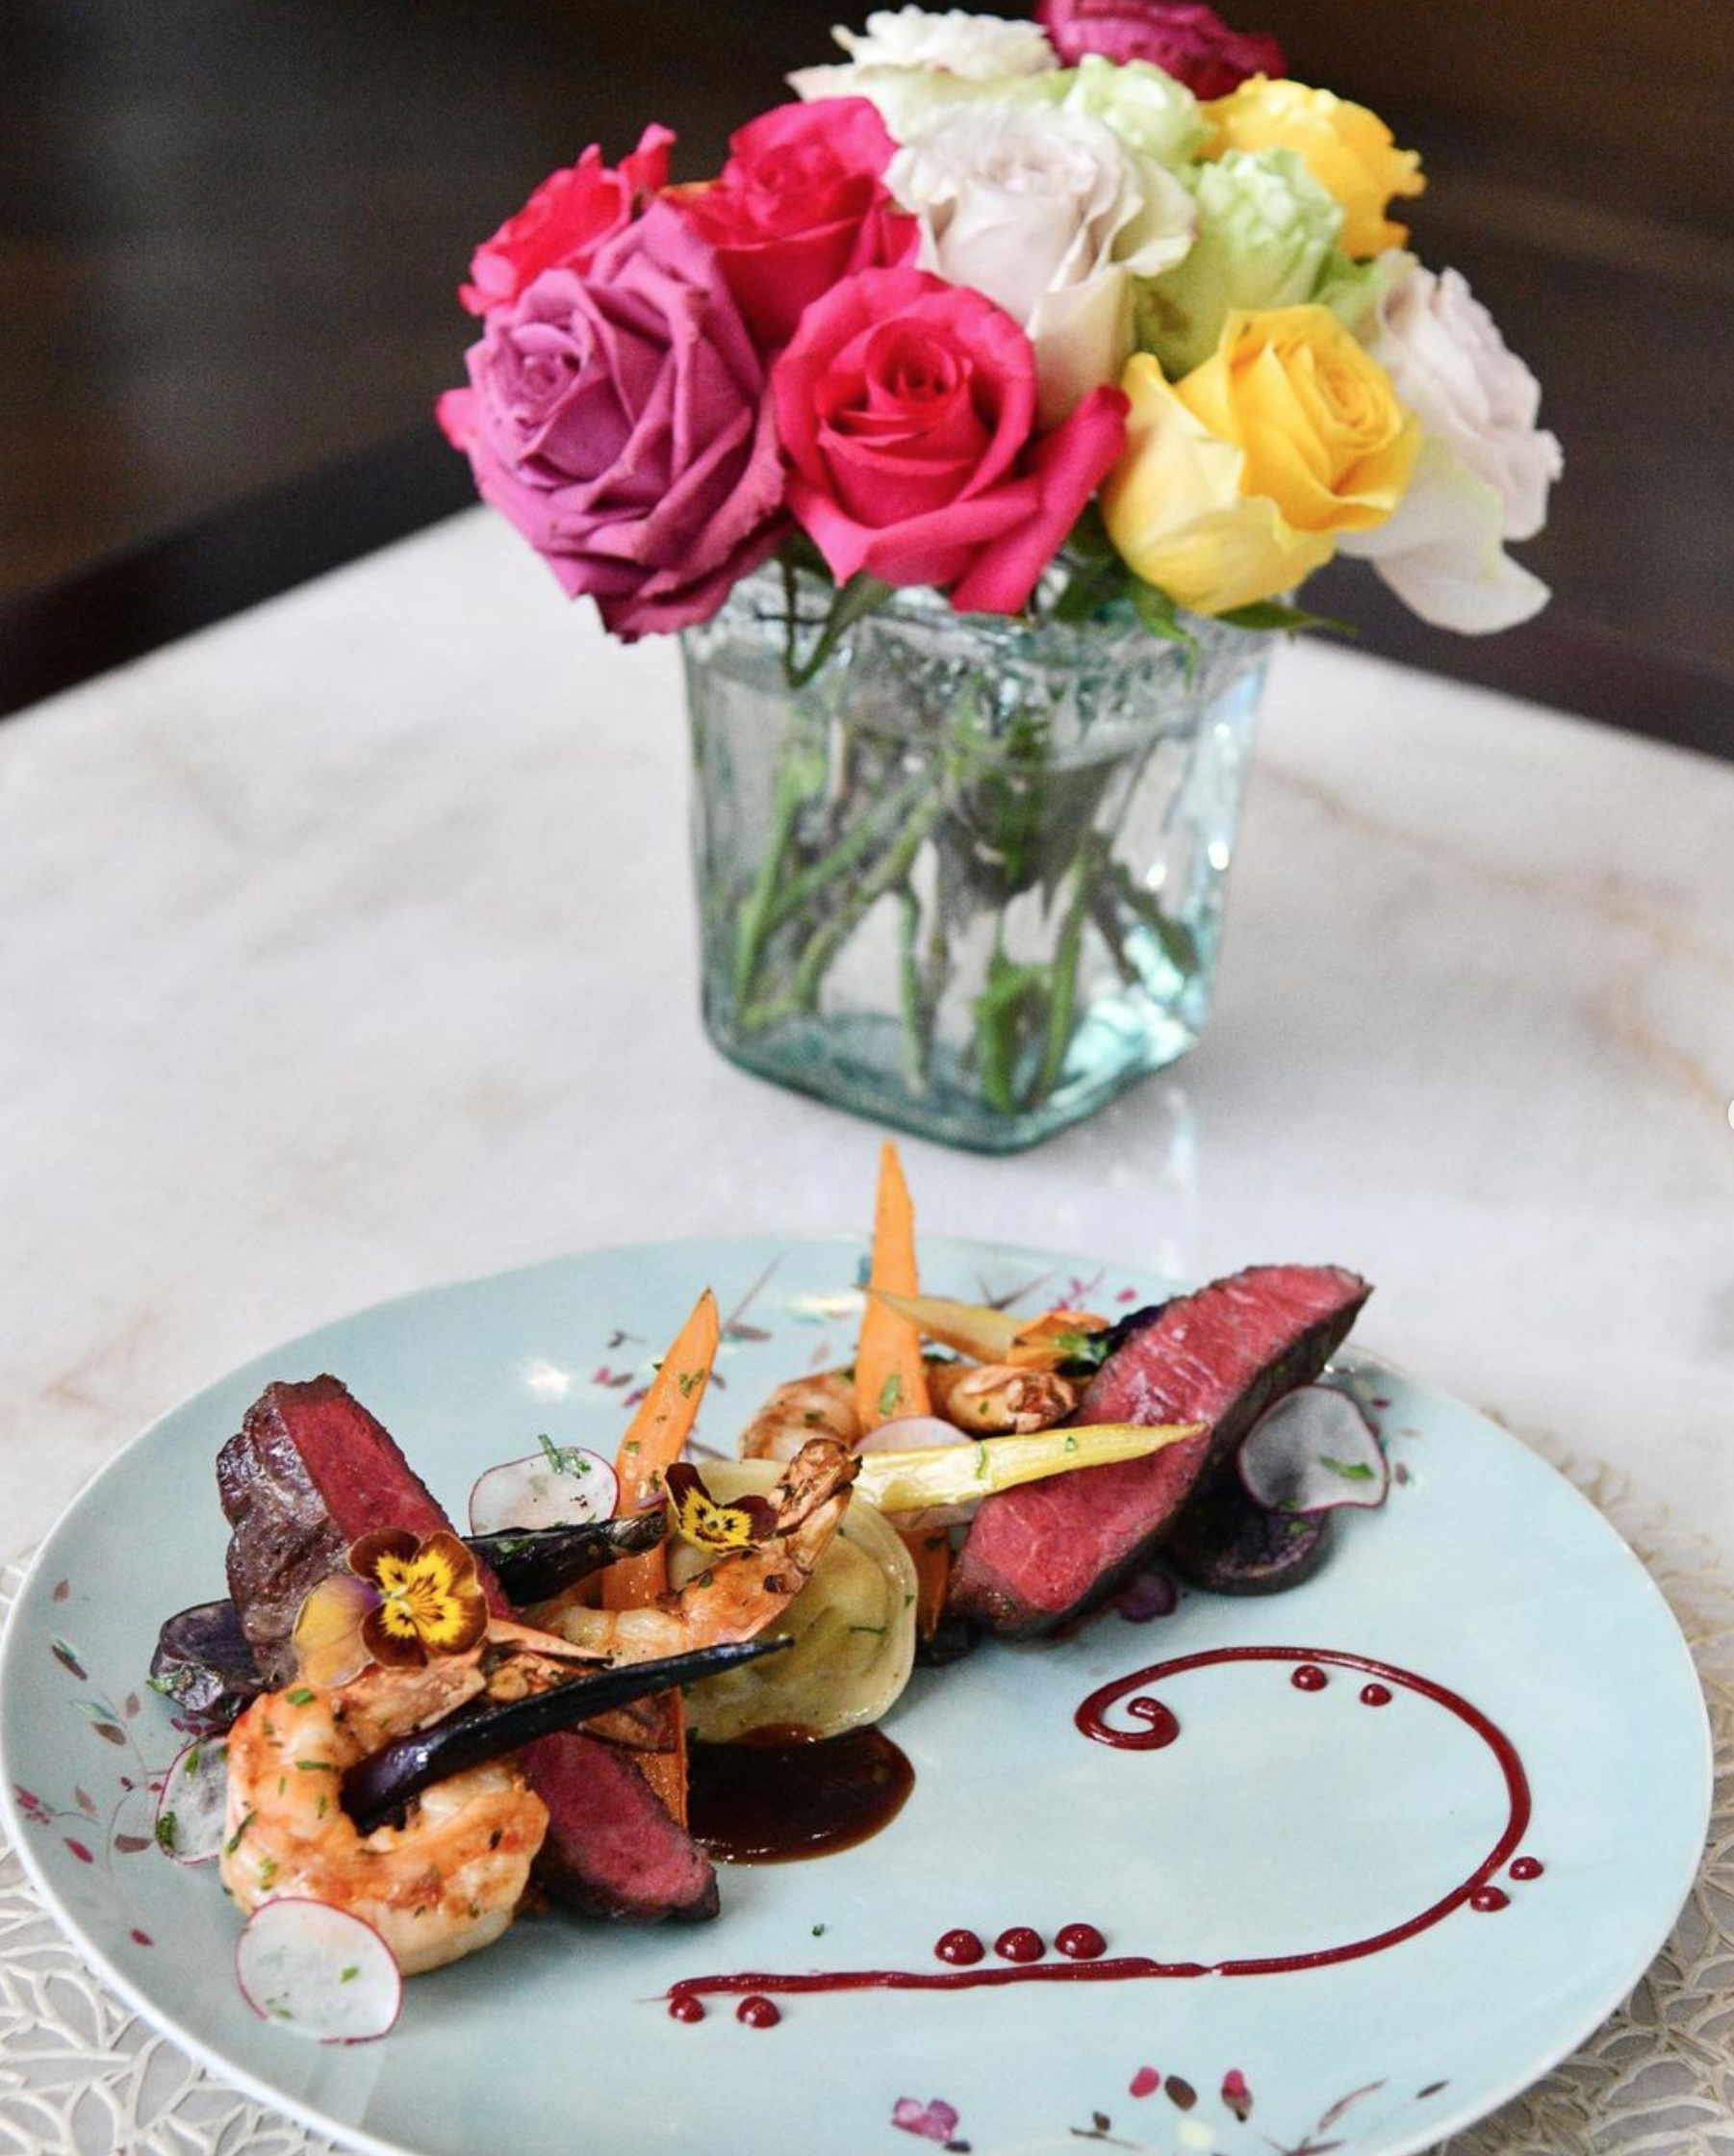 A dinner is served with a luxurious presentation for a Valentine's Day special at Bloom & Bee, a restaurant at The Post Oak Hotel at Uptown Houston in Texas.